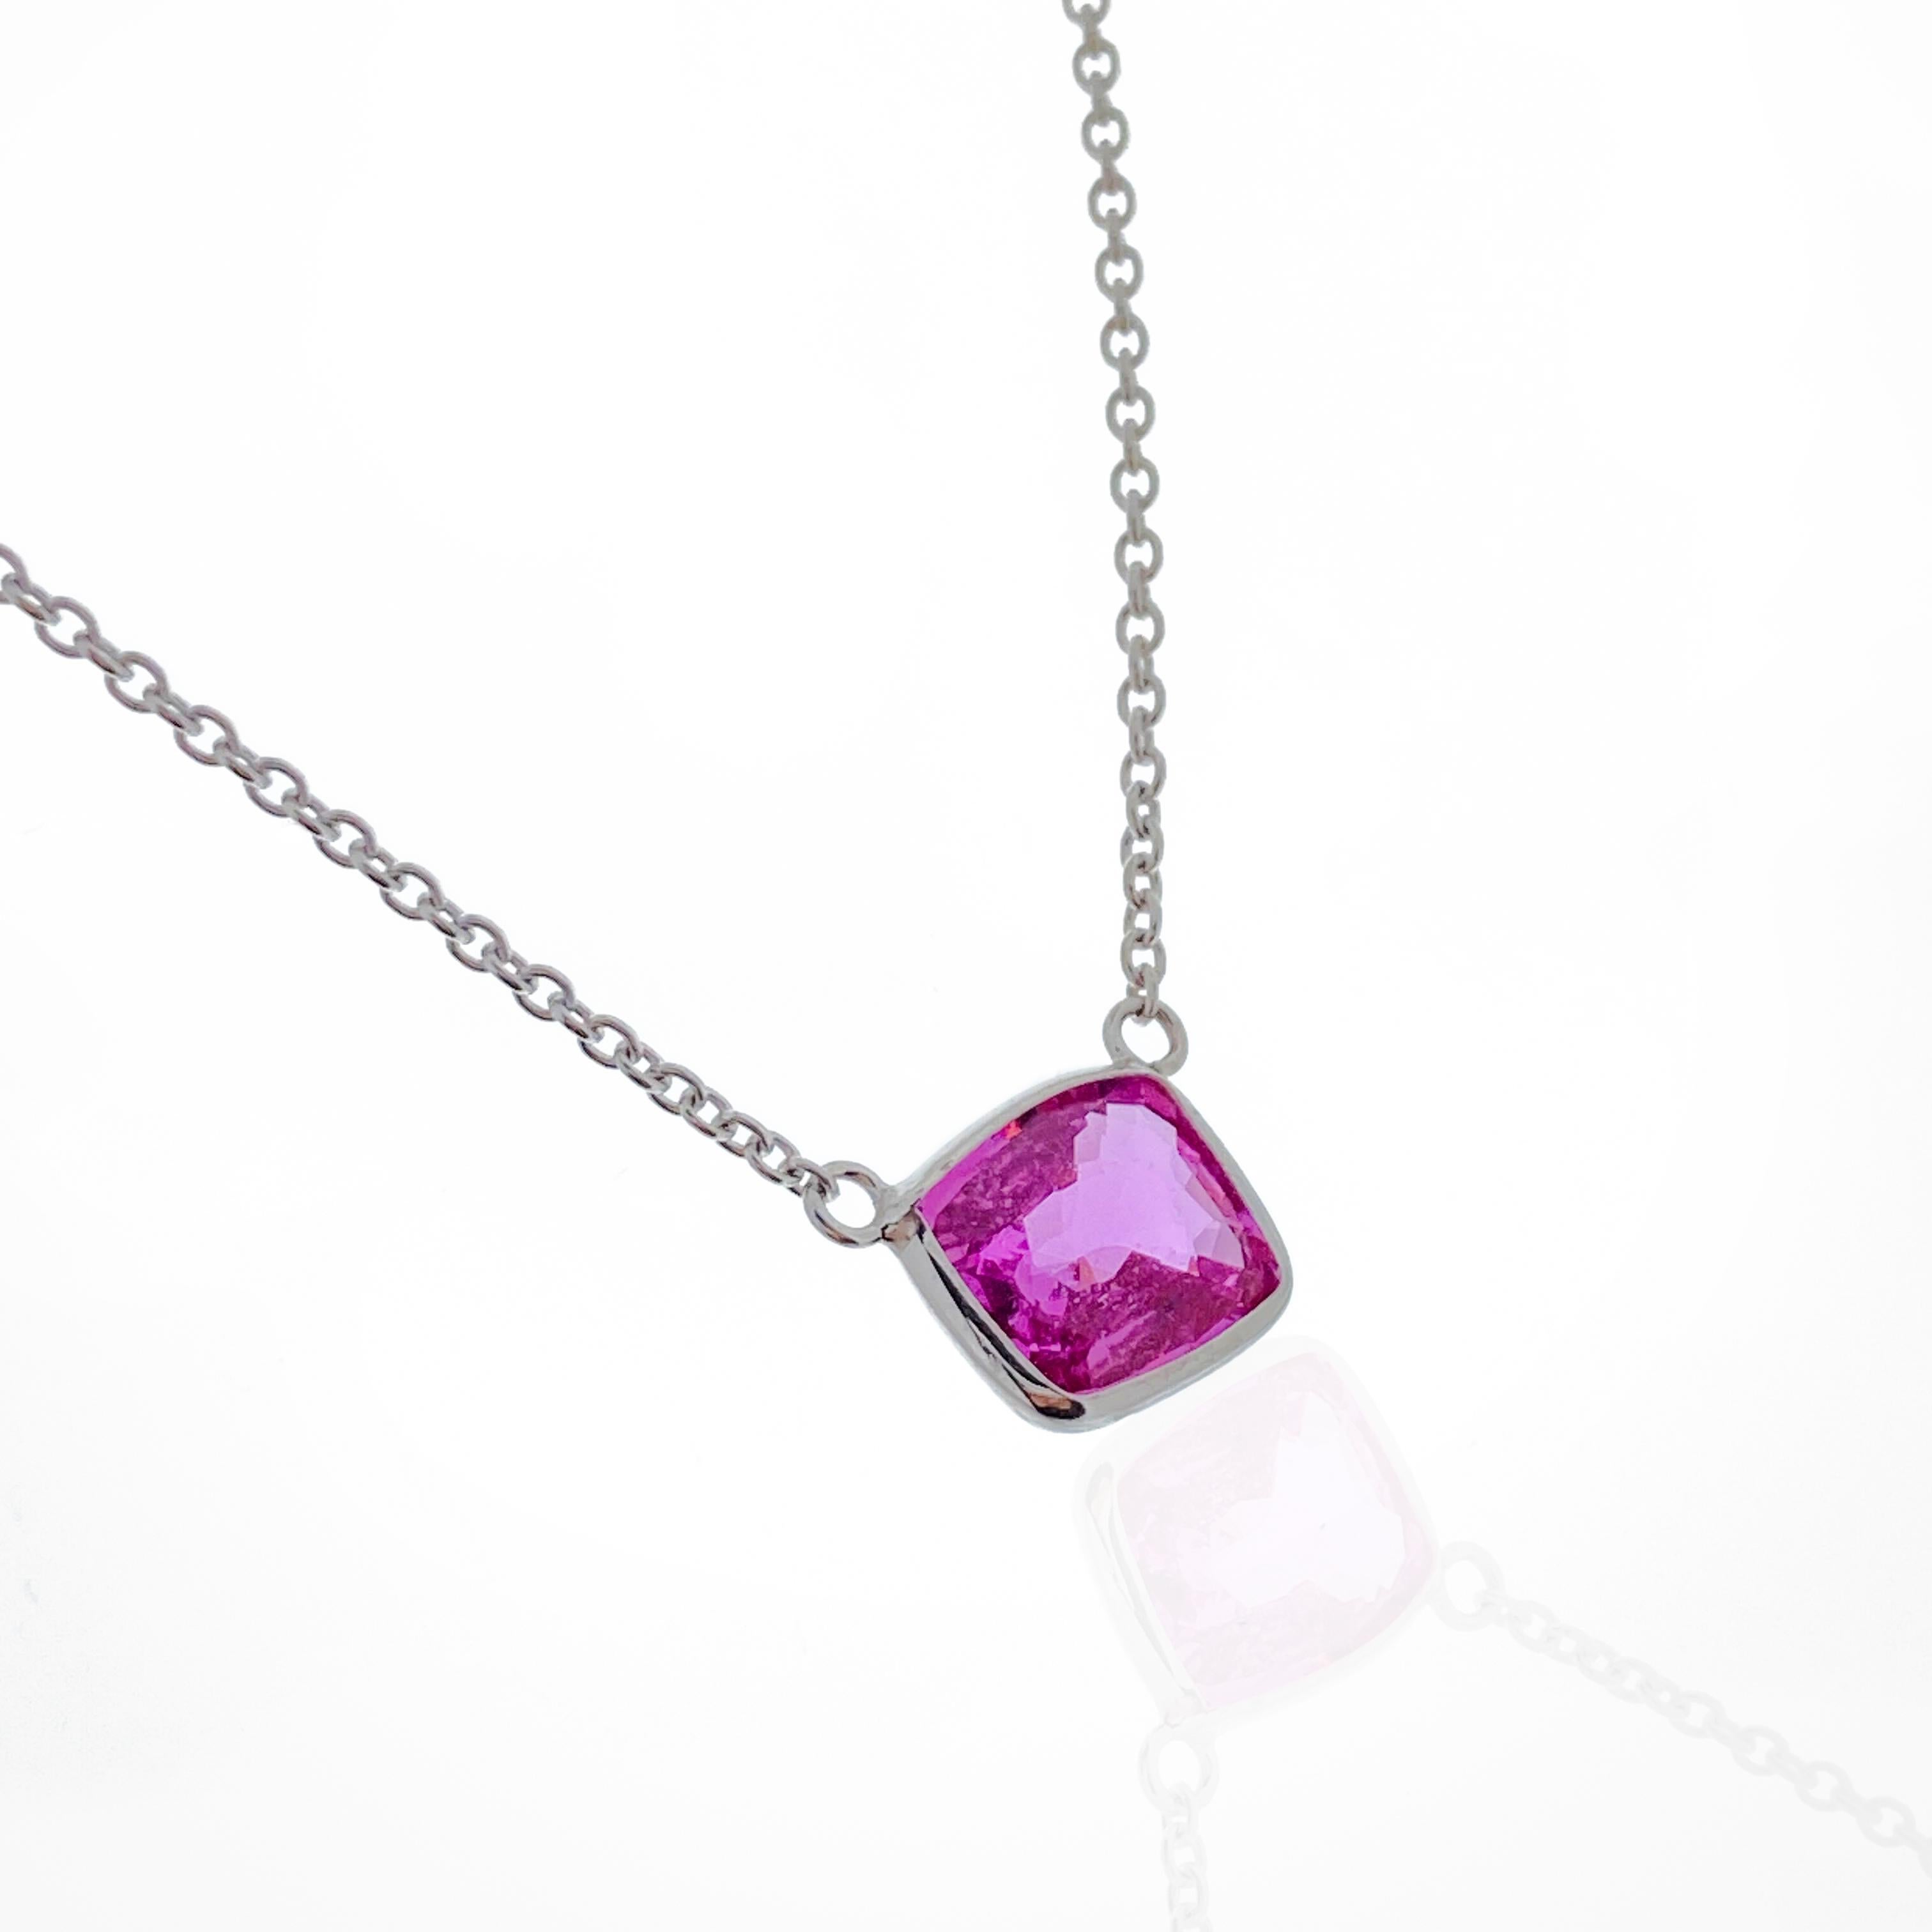 Contemporary 1.60 Carat Cushion Pink Sapphire Fashion Necklaces In 14K White Gold  For Sale